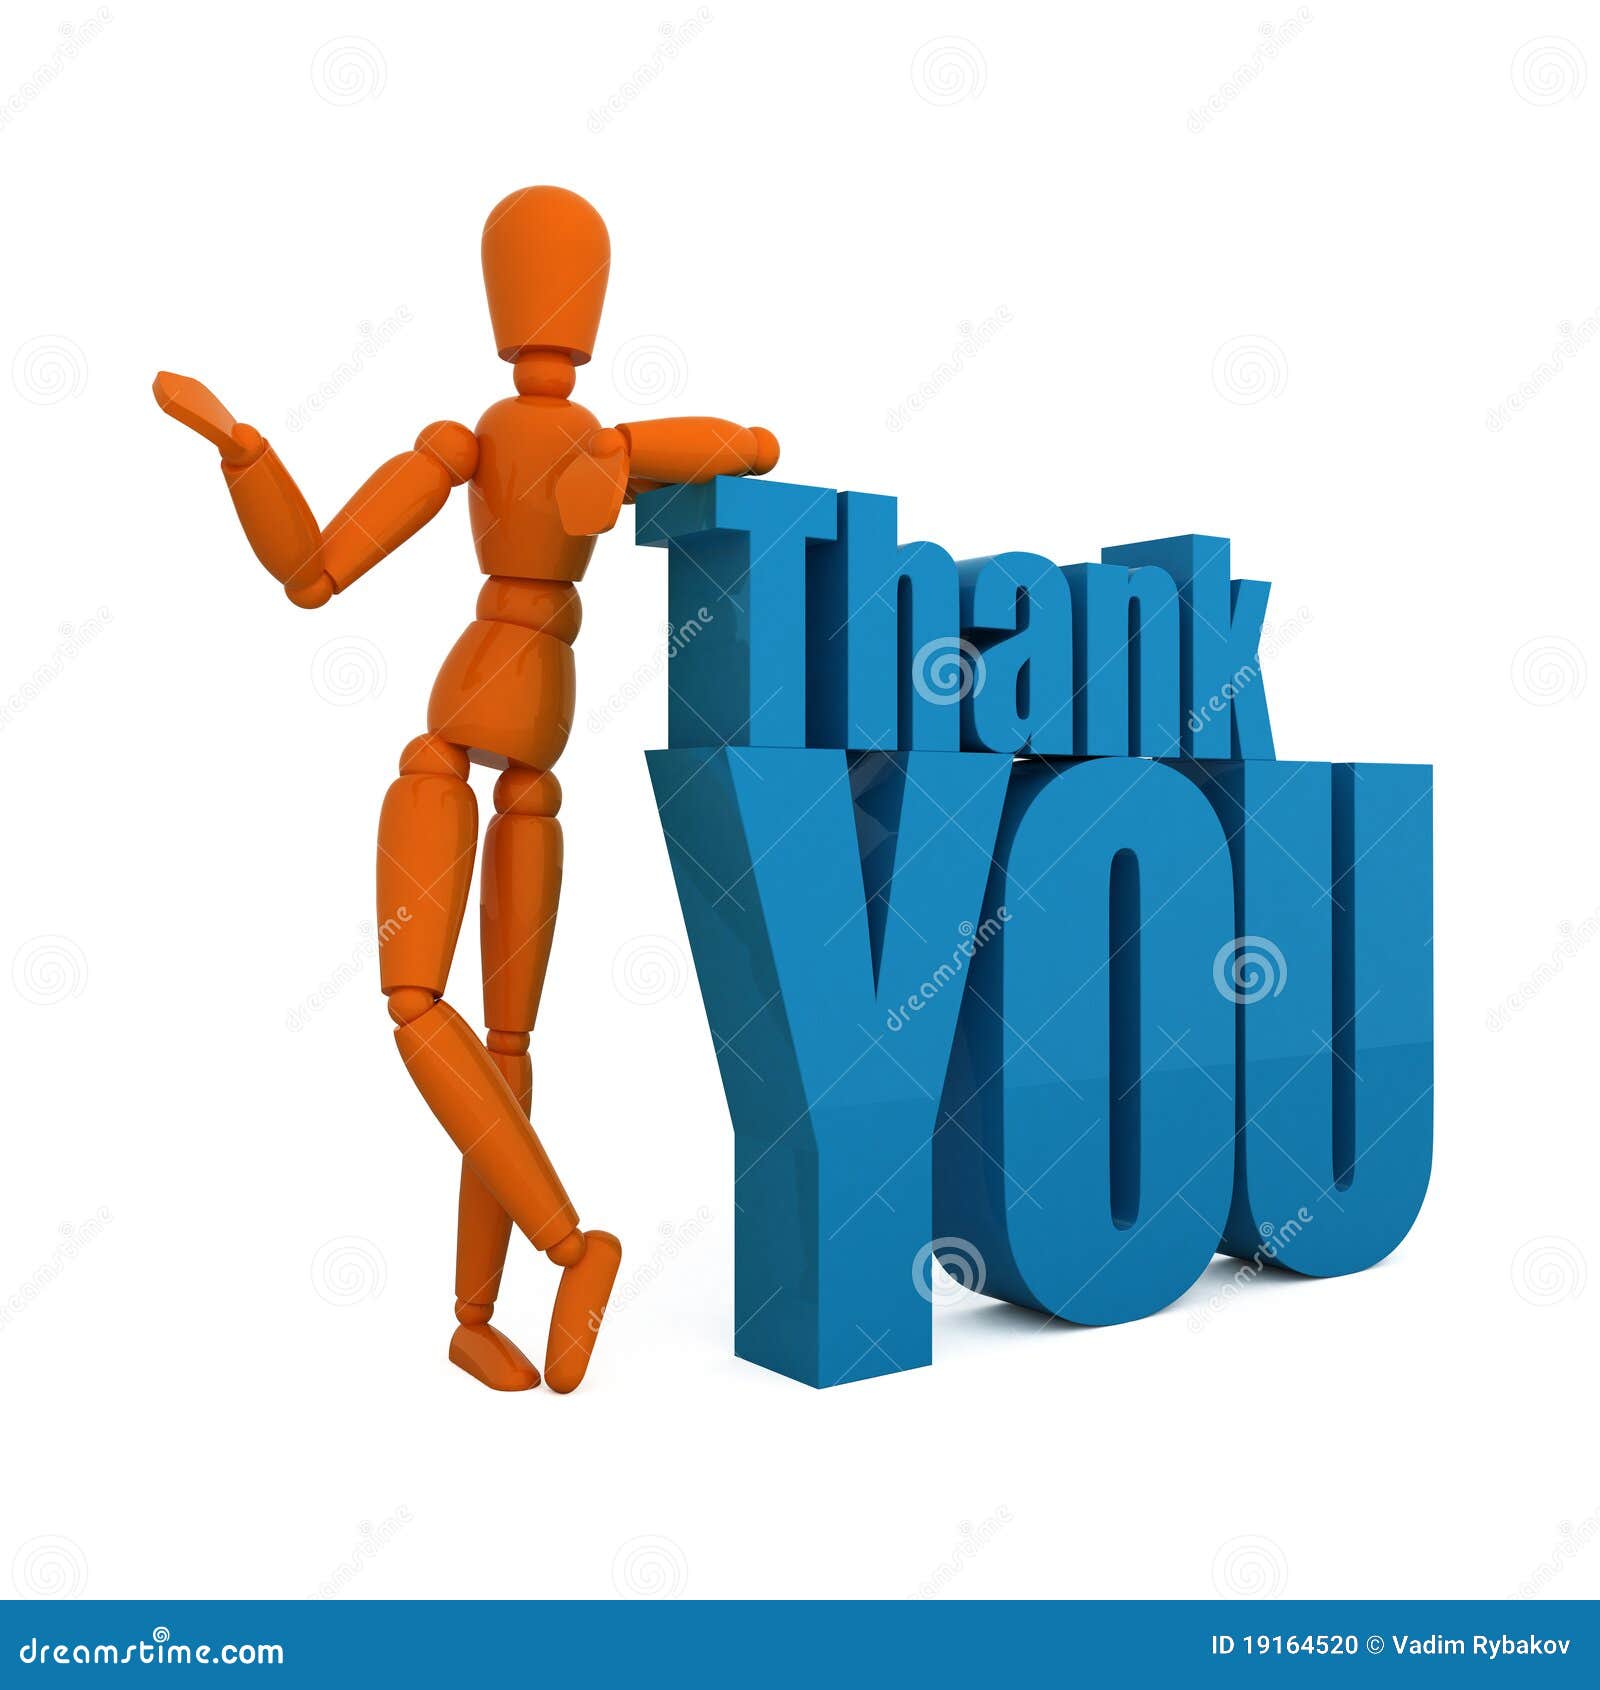 4,408 No Thank You Images, Stock Photos, 3D objects, & Vectors